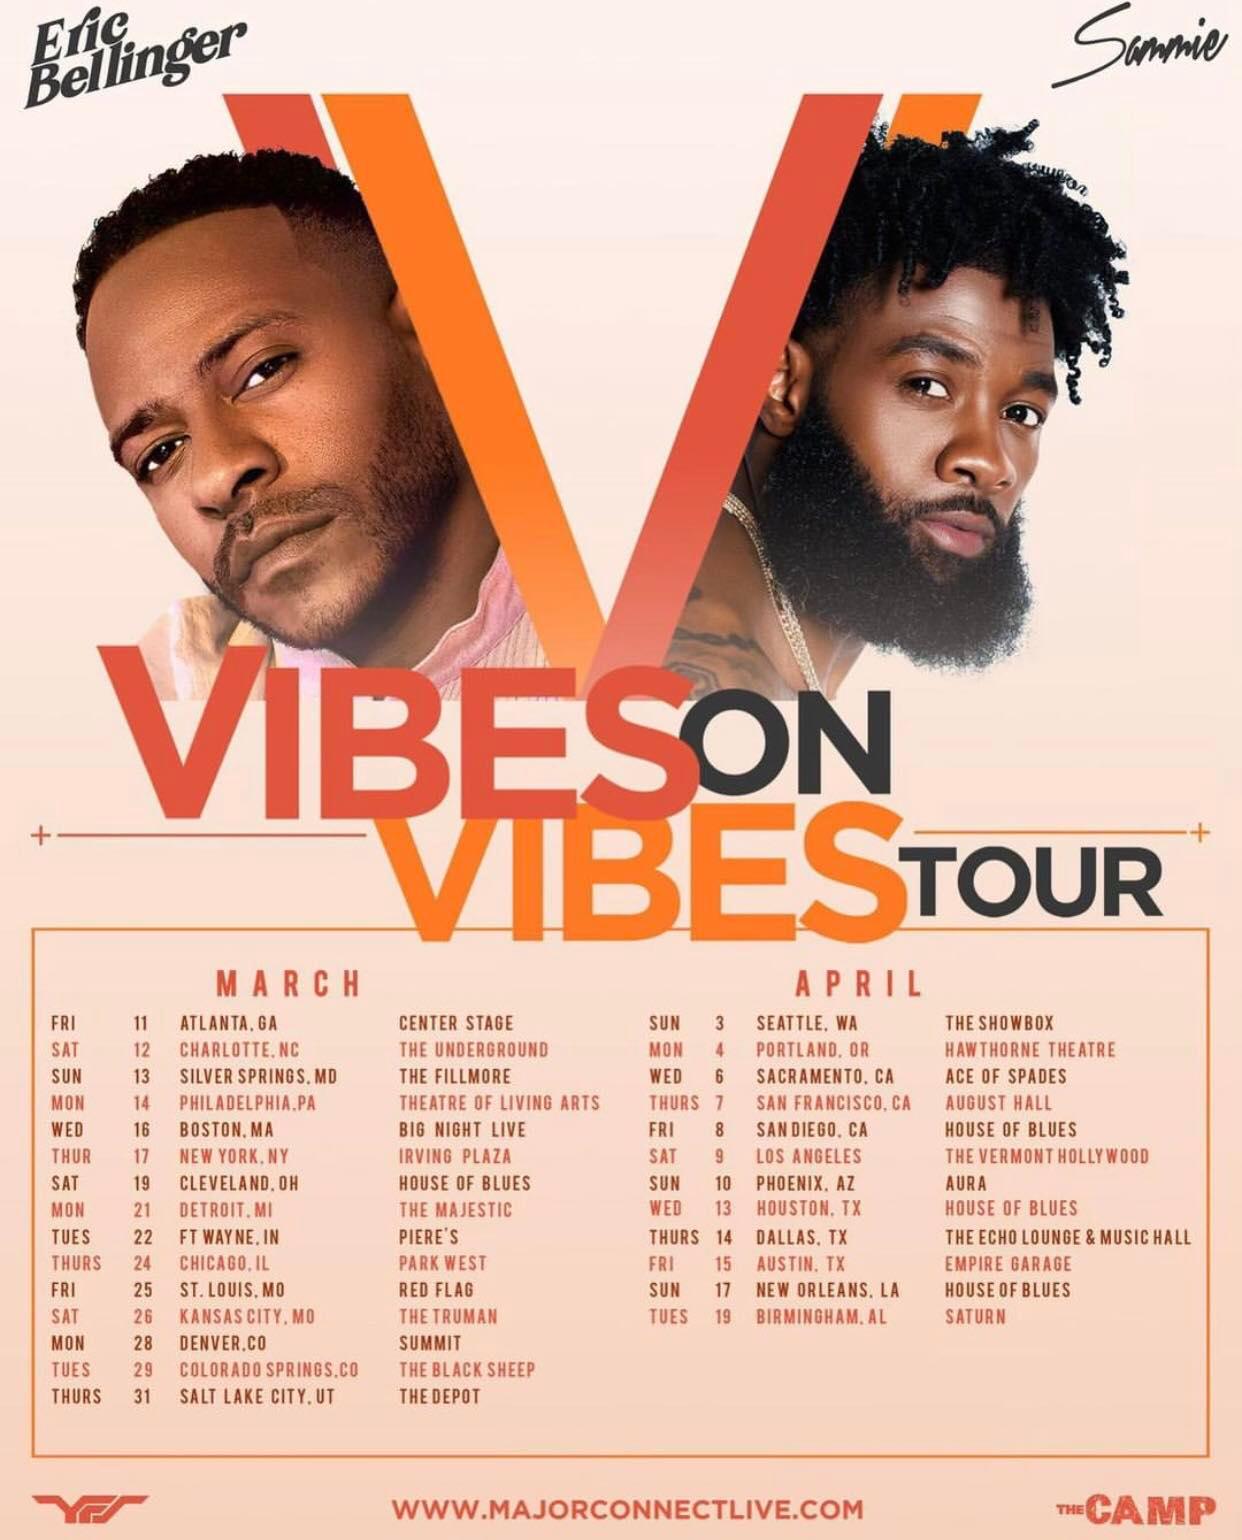 Vibes on Vibes tour